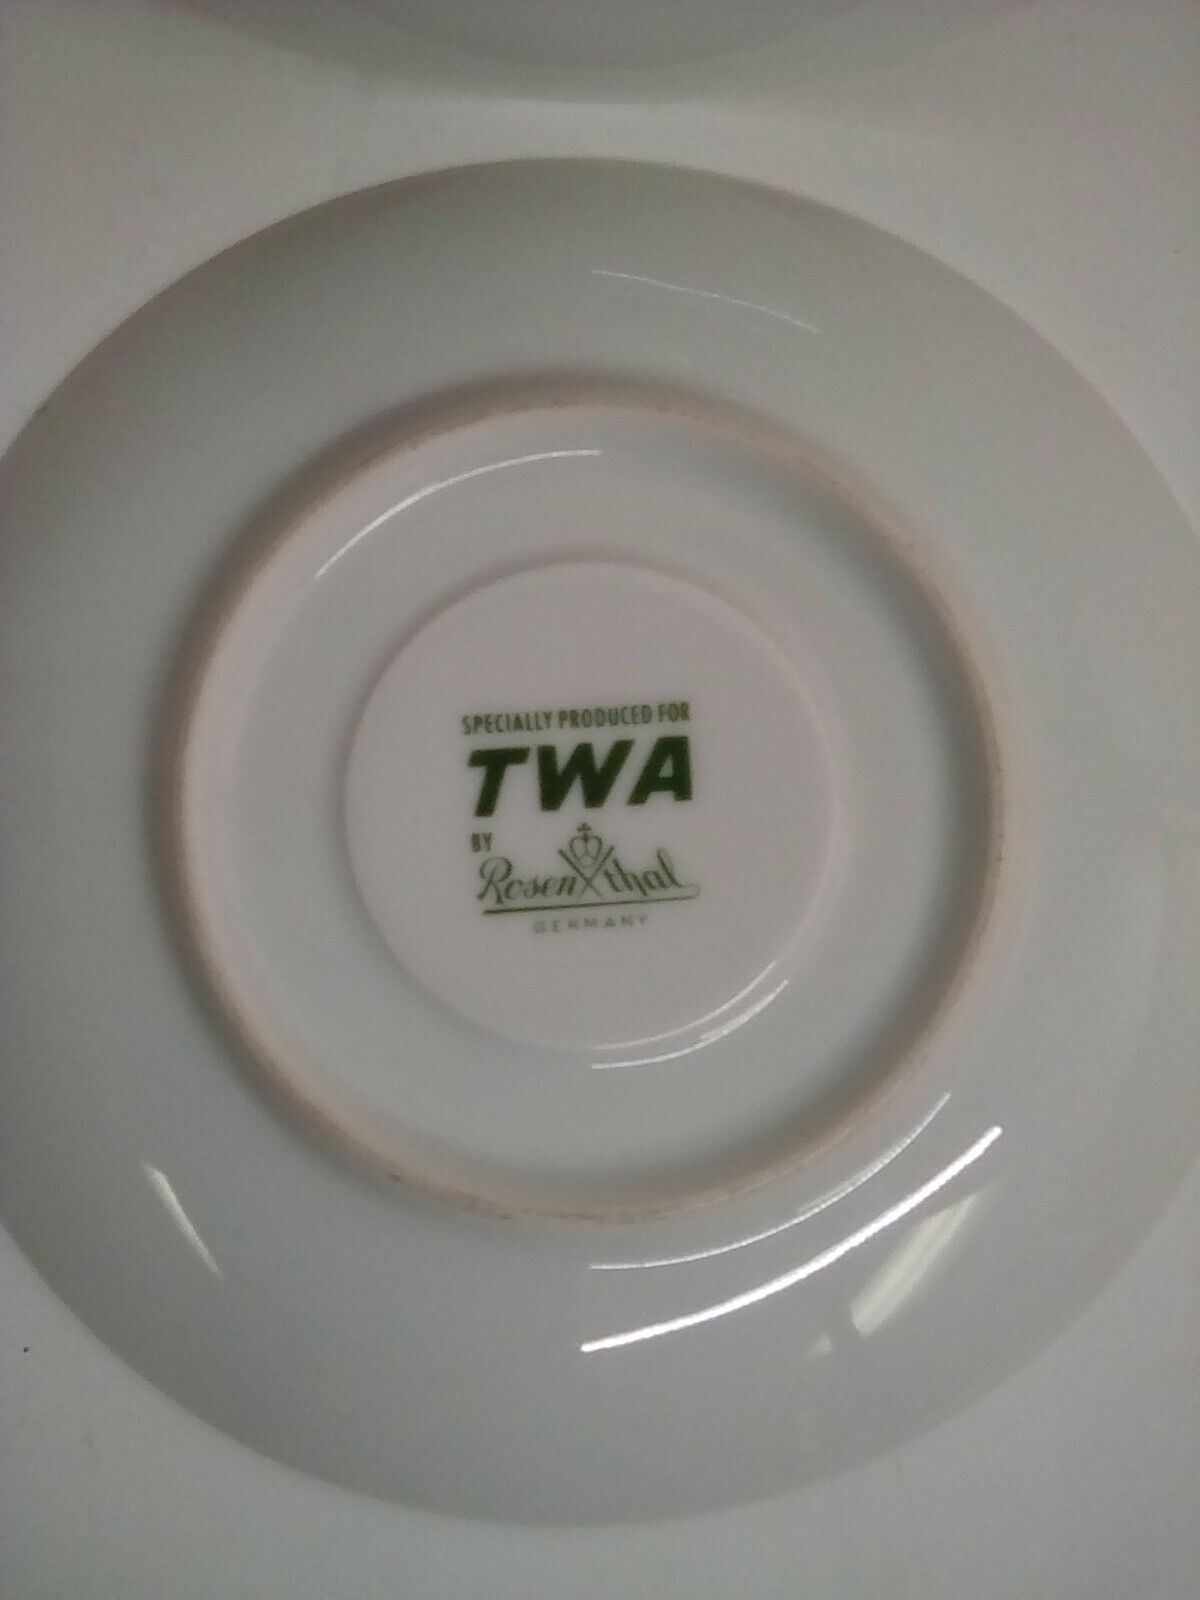 Vintage Airplane 2 Five Inch TWA  cup saucers by Rosenthal , Germany  no chips.